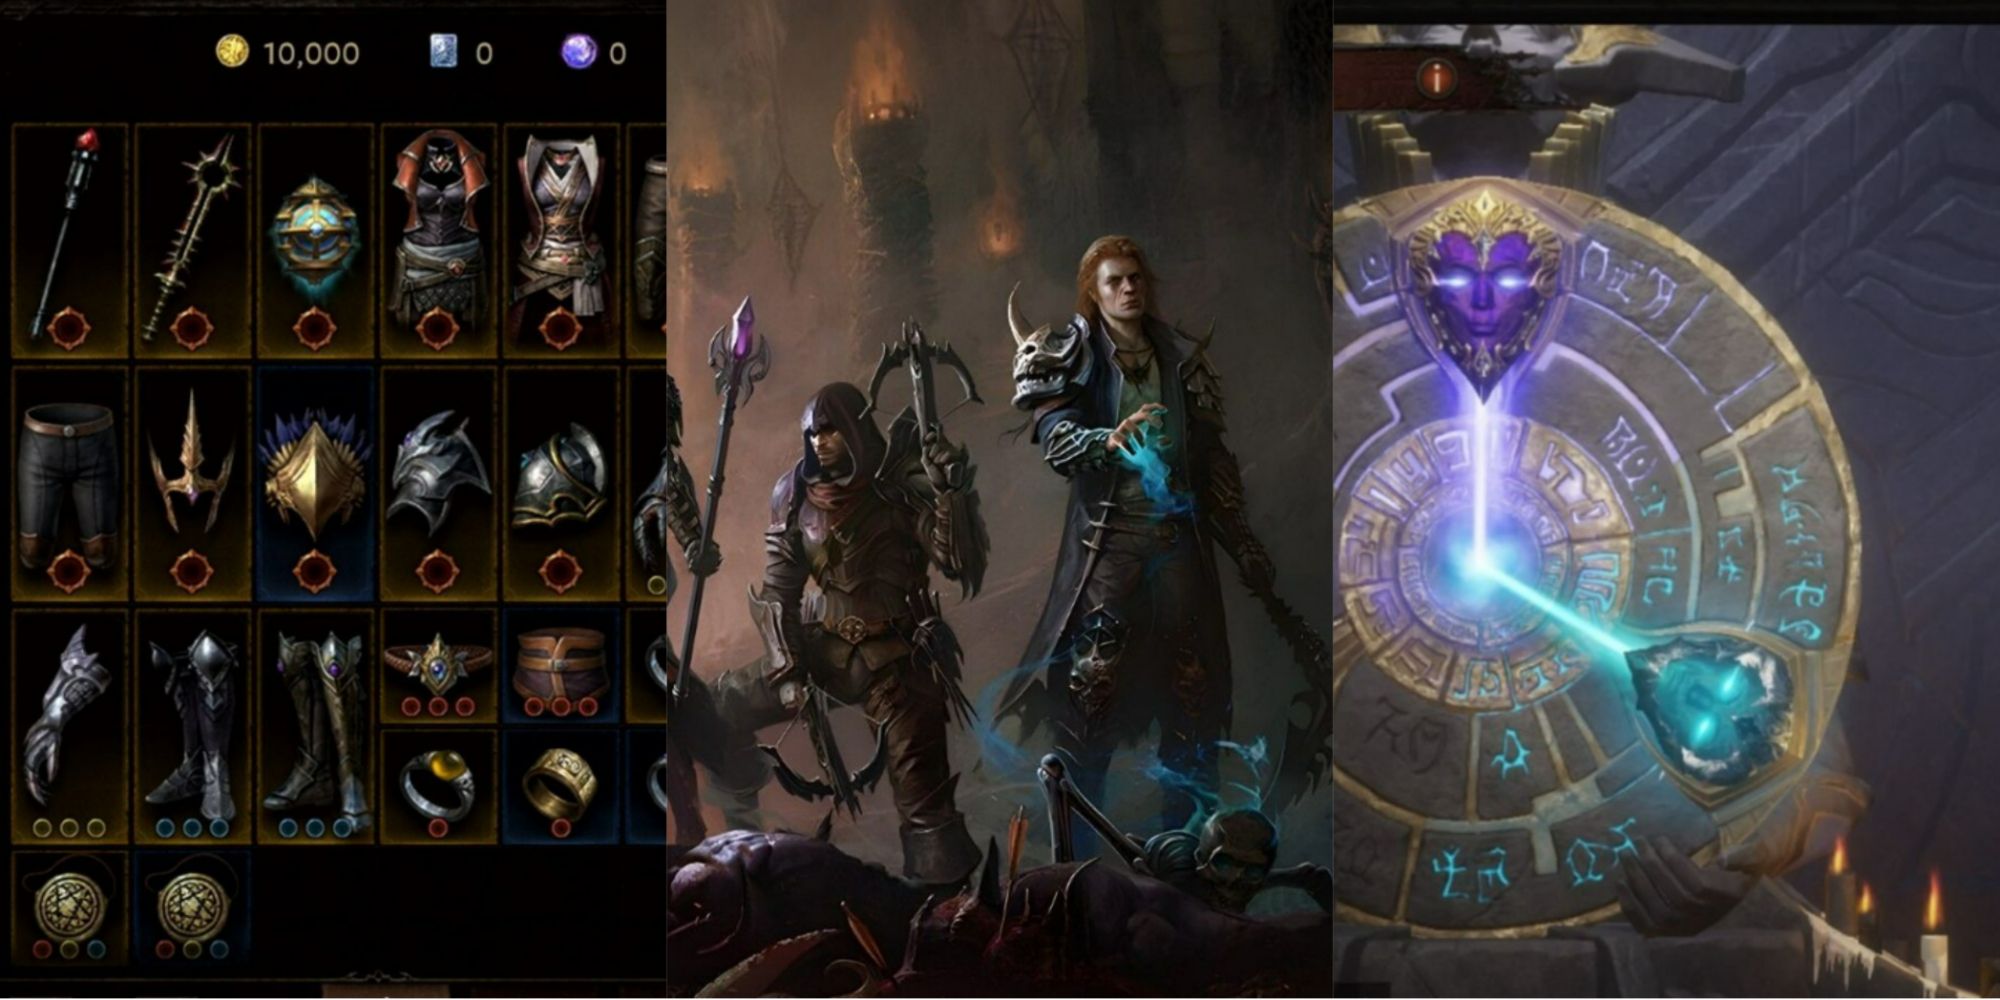 The inventory, characters, and Elder Rift from Diablo Immortal